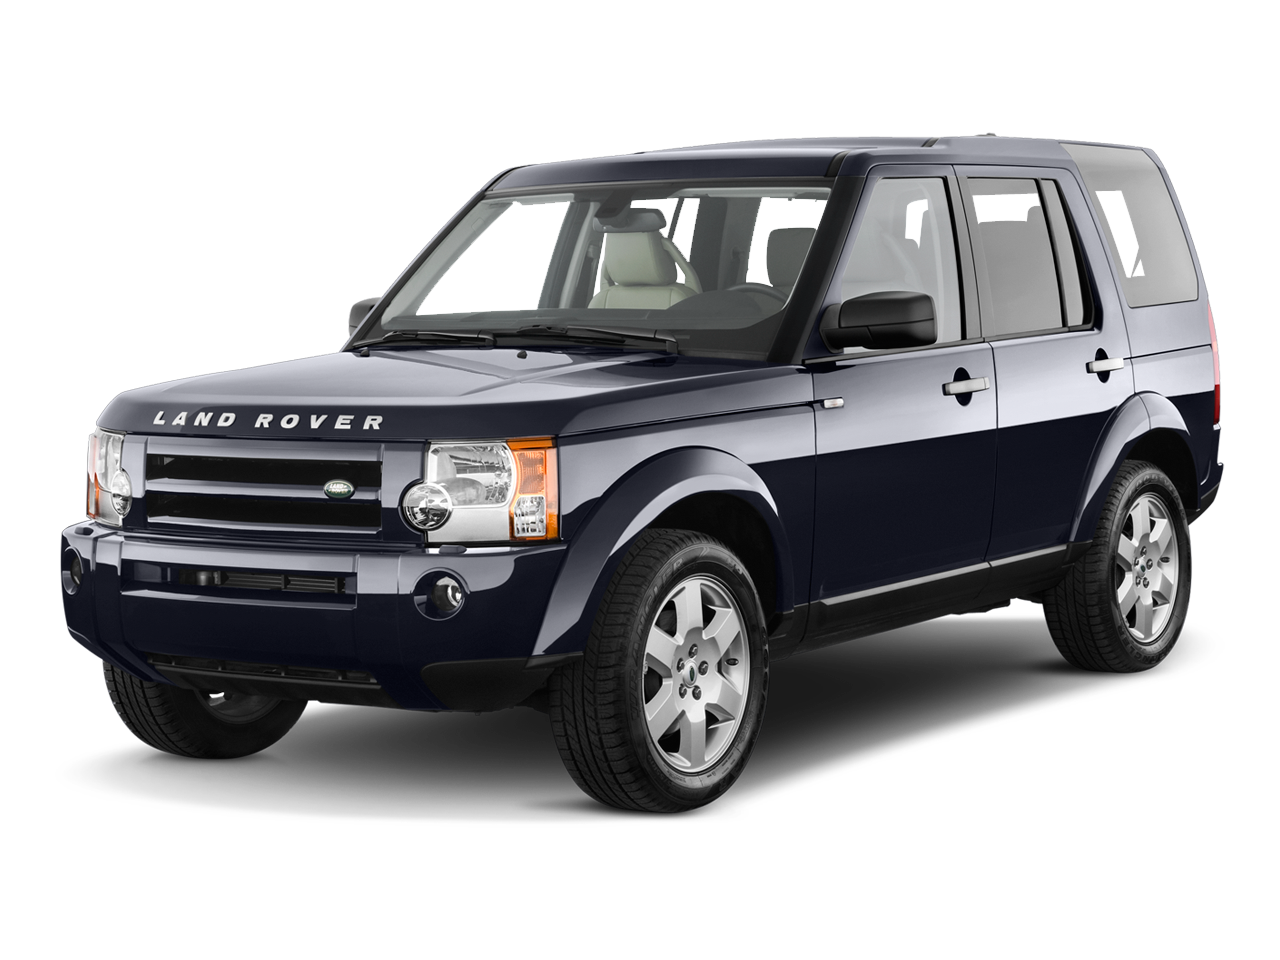 2009 Land Rover LR3 Prices, Reviews, and Photos - MotorTrend